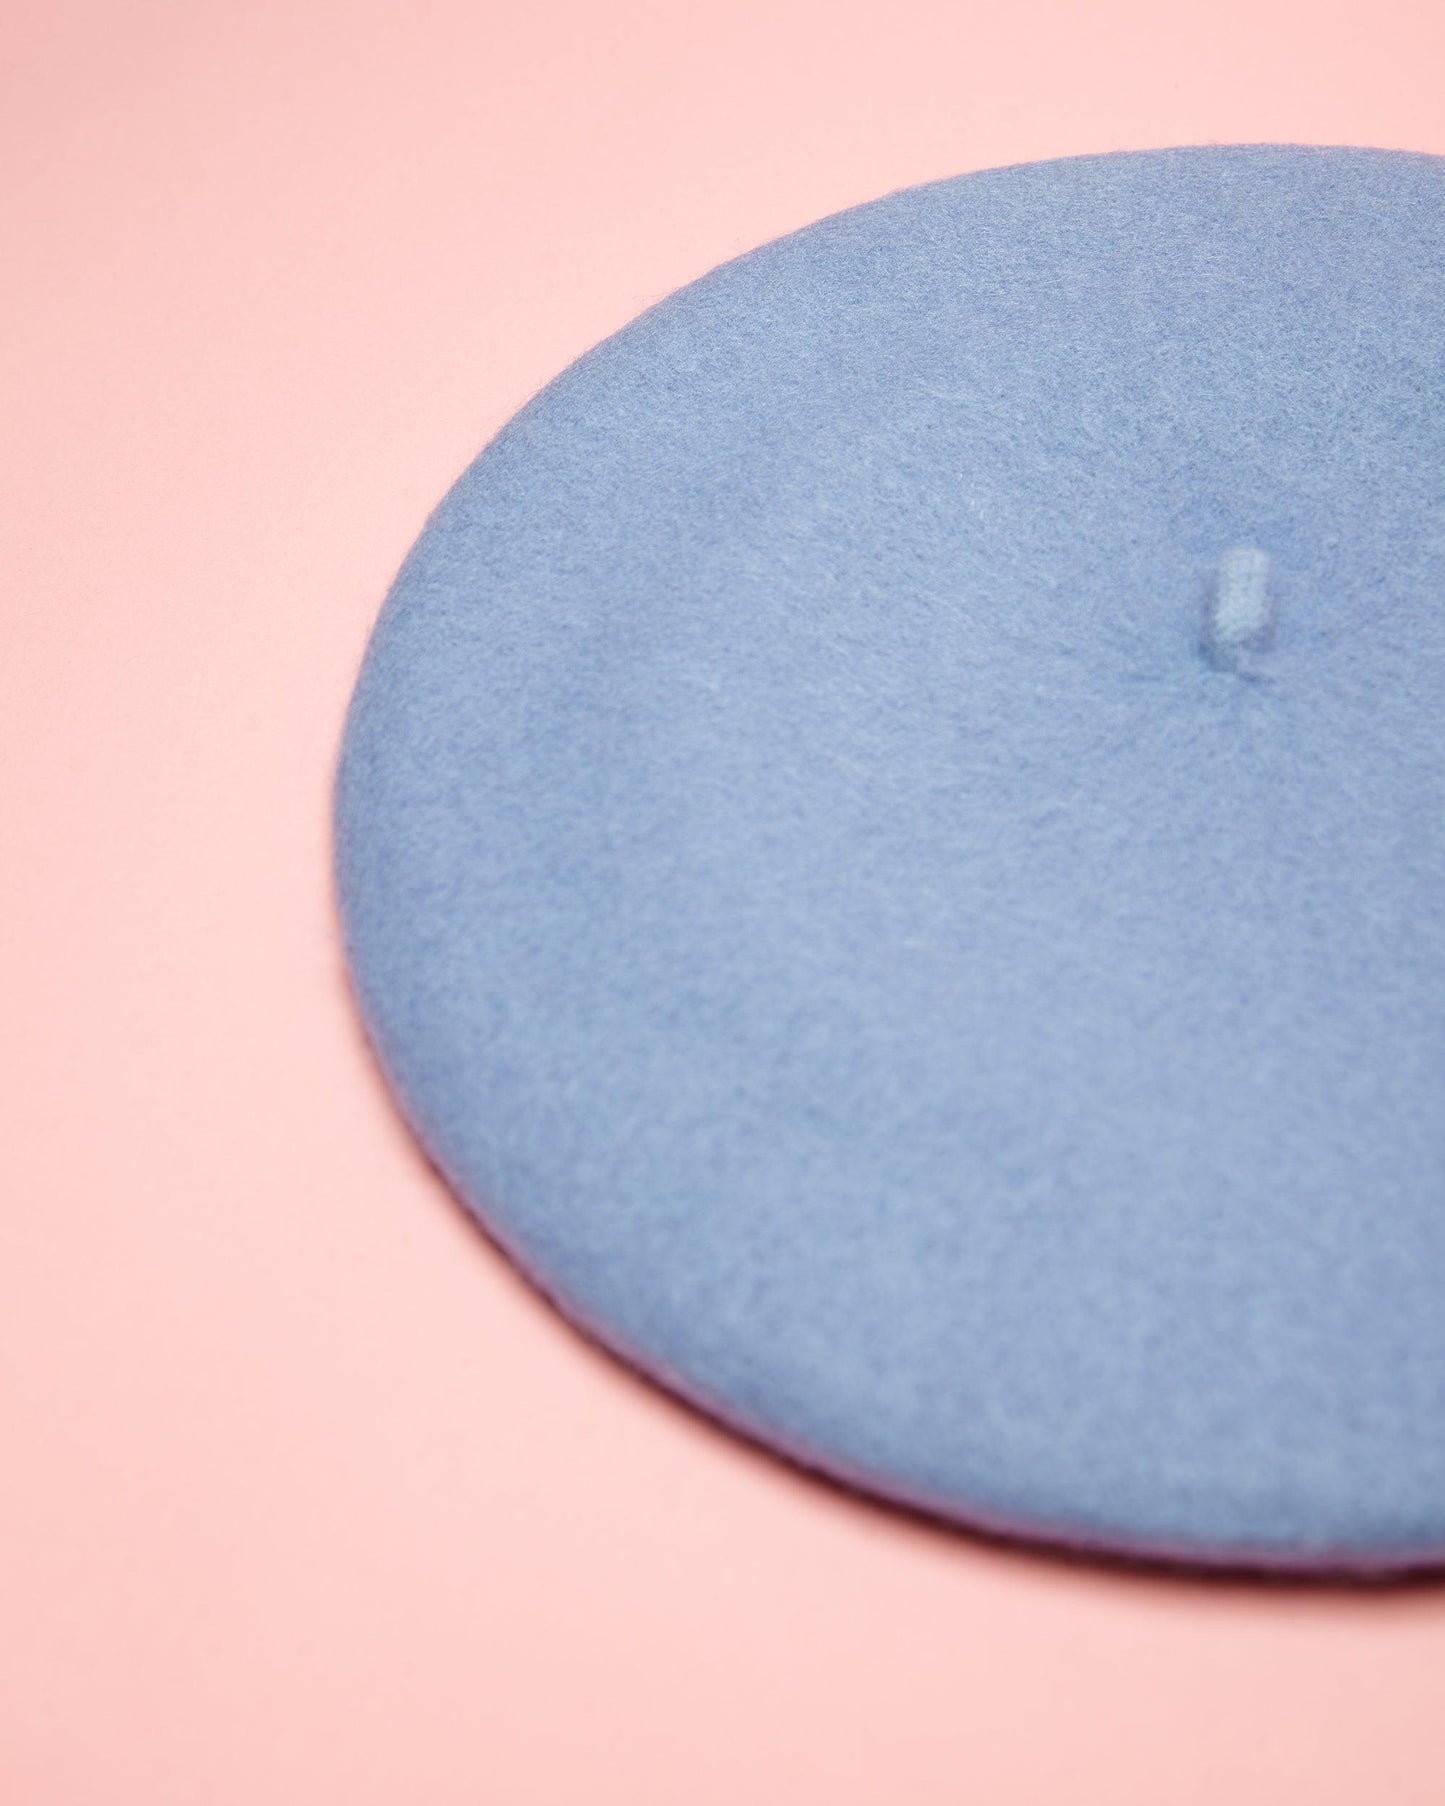 HOMO beret - light blue | One size fits all.